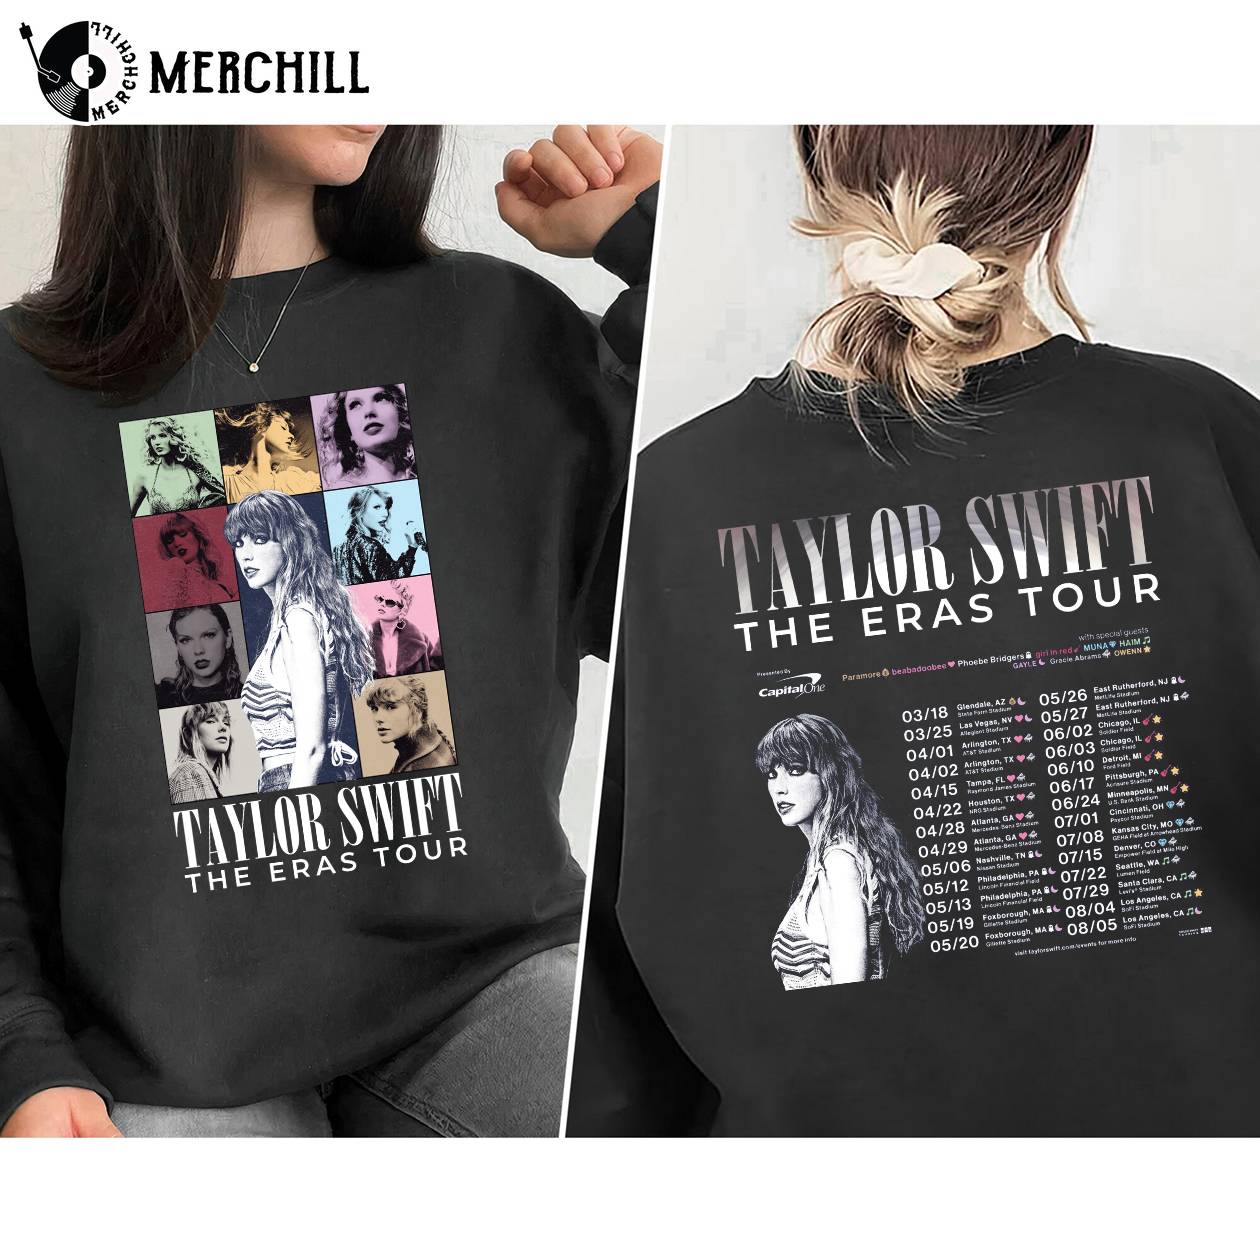 If I Die Tell Taylor Swift I Love Her Shirt Funny Swiftie Tee Eras